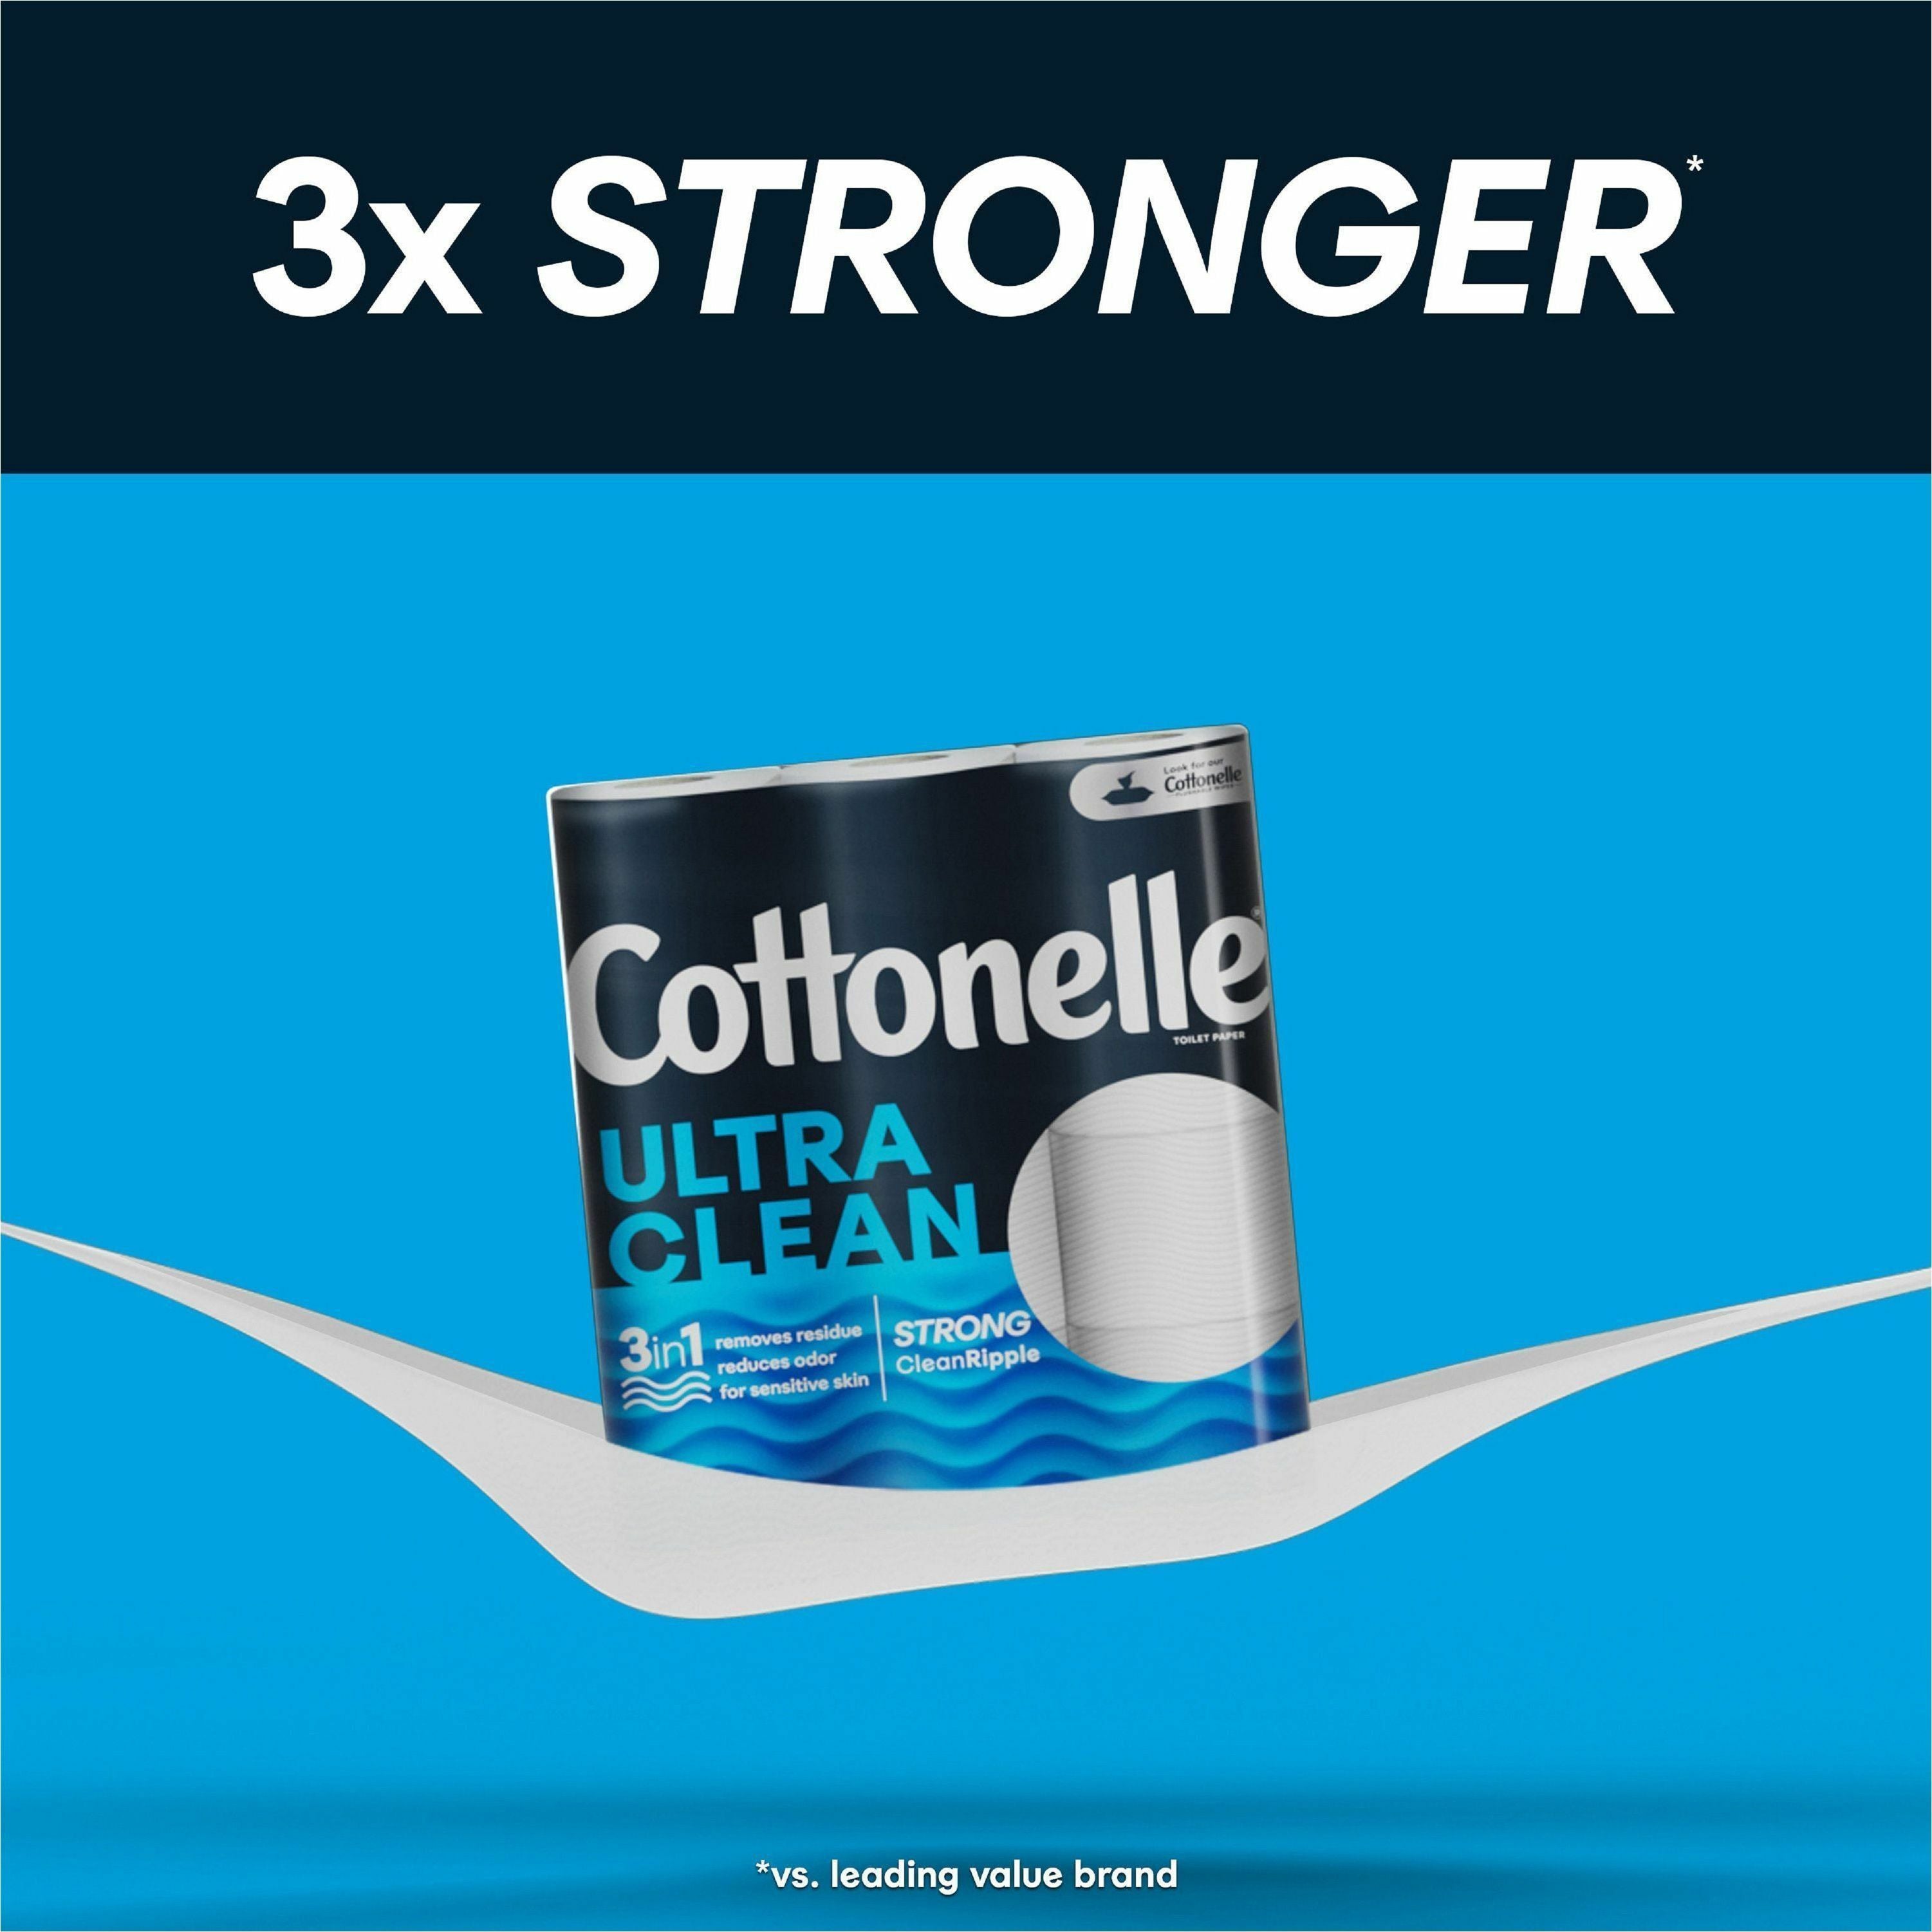 cottonelle-ultra-clean-toilet-paper-1-ply-312-sheets-roll-white-fiber-flushable-clog-safe-sewer-safe-septic-safe-chemical-free-dye-free-thick-absorbent-fragrance-free-paraben-free-for-toilet-24-pack_kcc54161 - 3